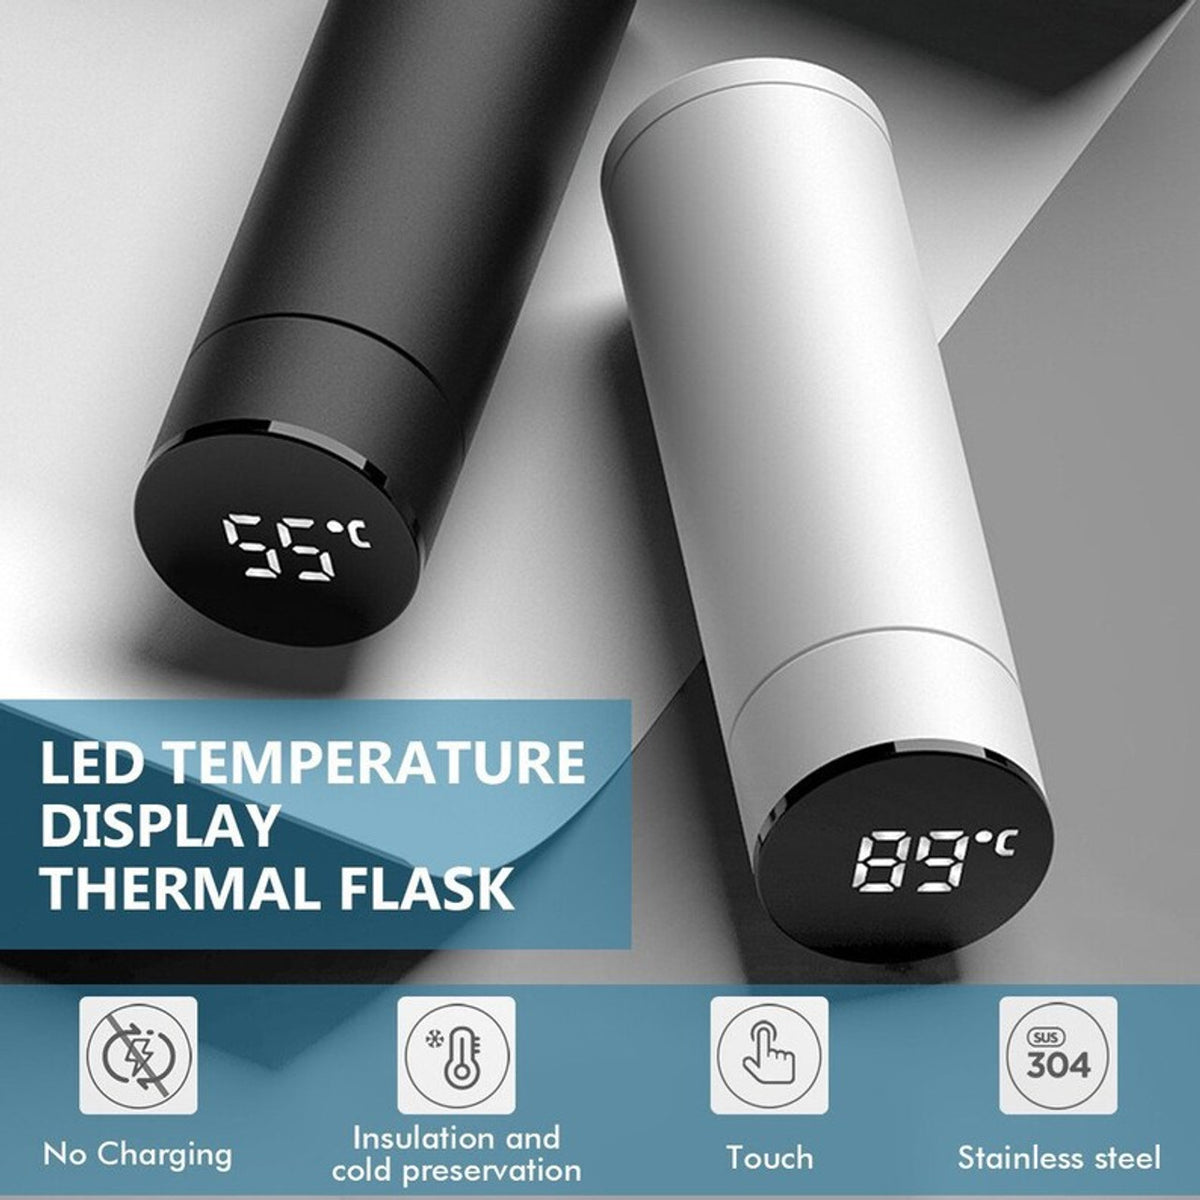 Temperature Water Bottle, LED Temperature Display Vacuum Insulated Water Bottle, Stainless Steel Thermos Flask Coffee Cup, Hot Cold Vacuum Mug, 500ml Smart Thermos